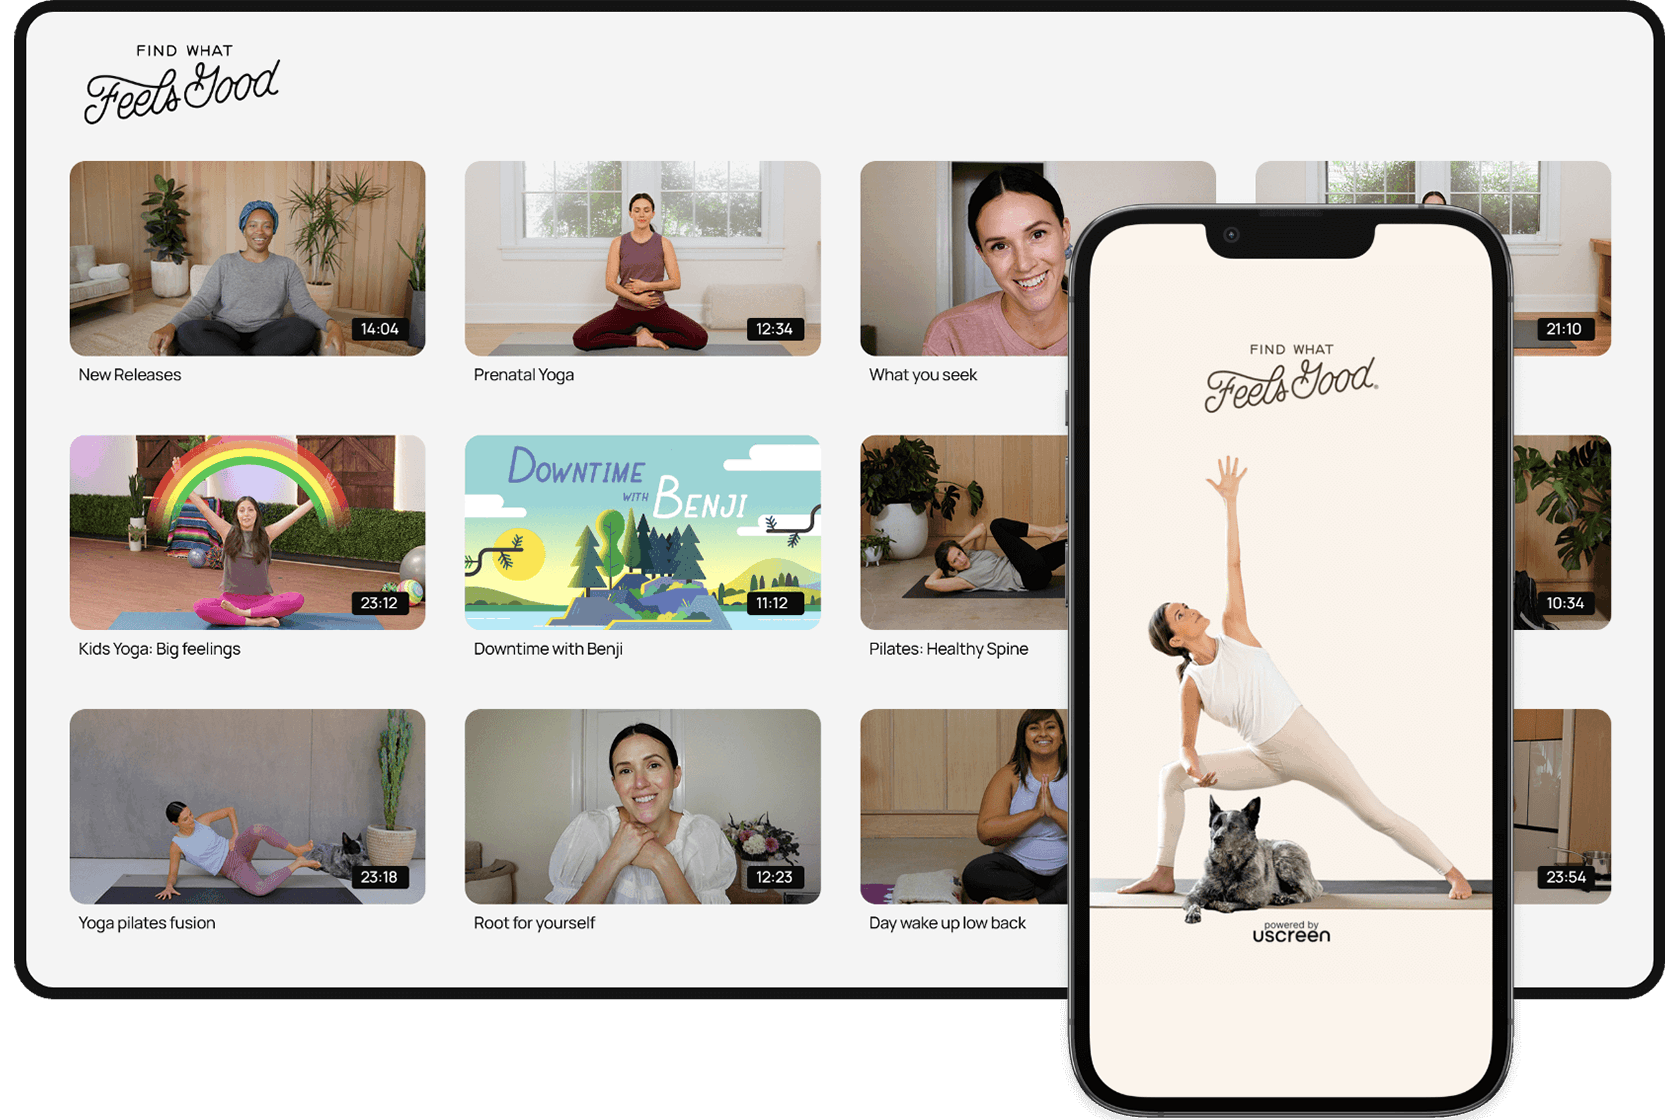 An image of Yoga With Adriene's Mobile and Desktop Membership catalog.